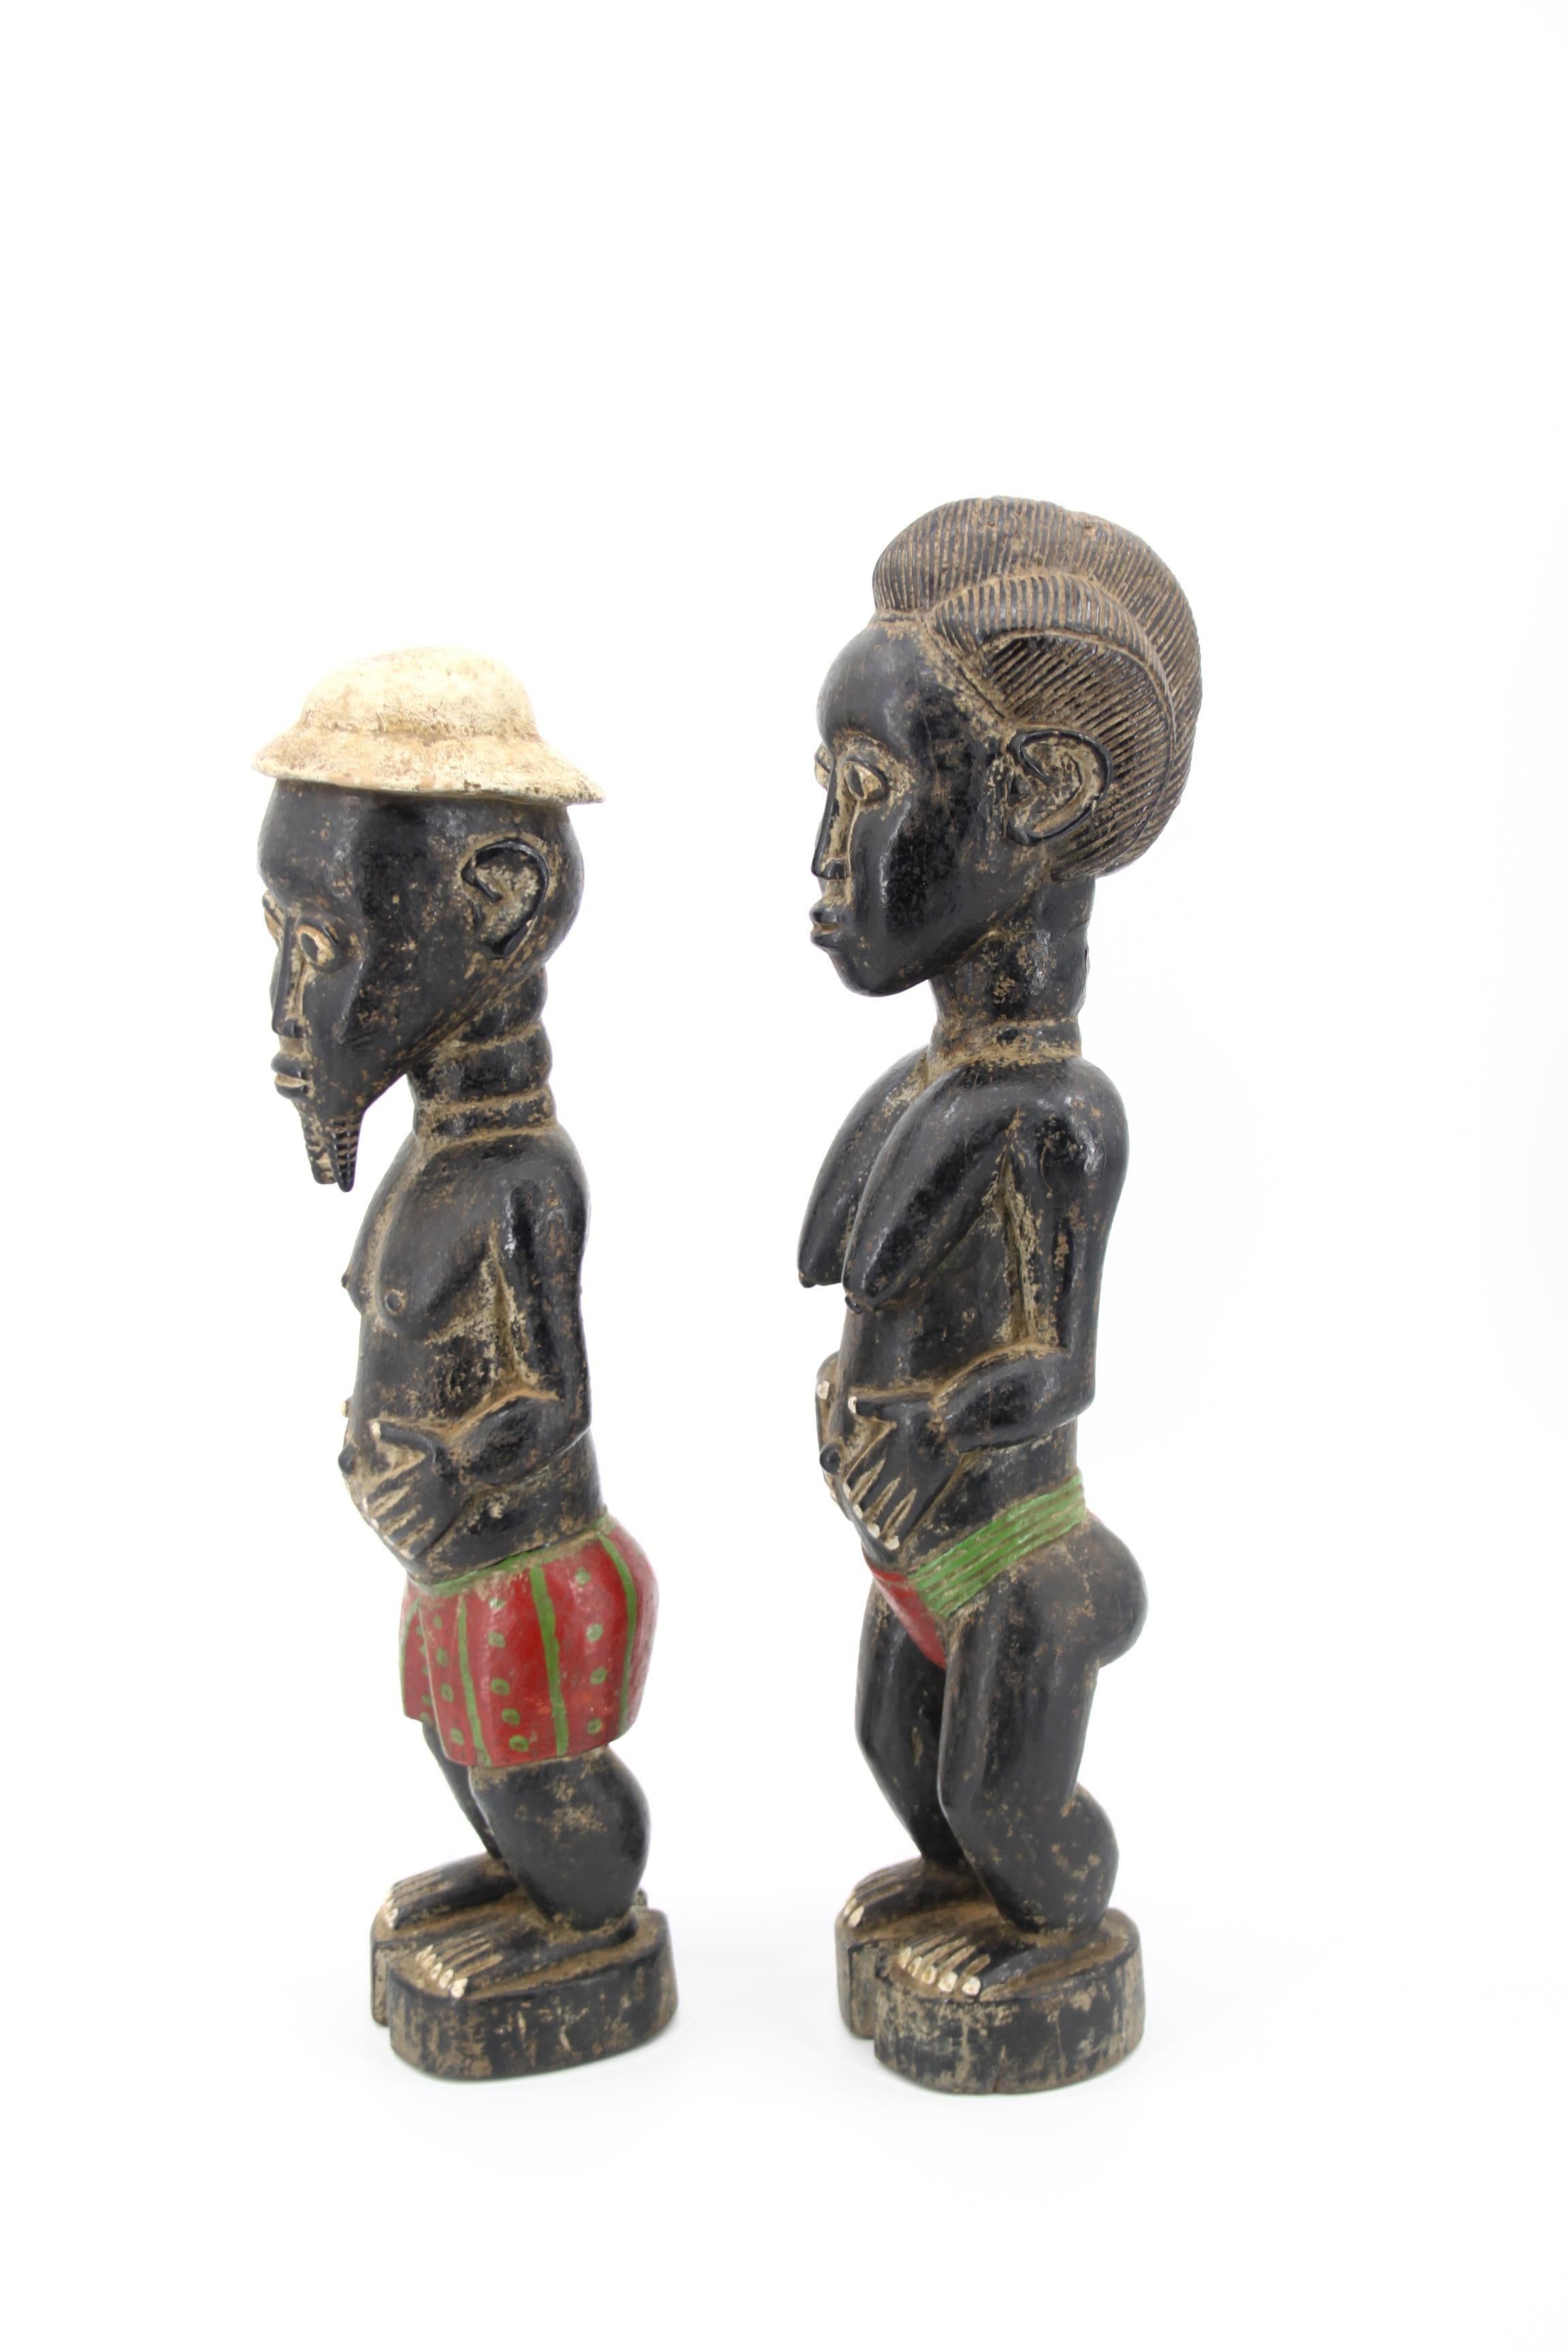 Baoulé, Wooden statue Africa Ivory Coast
The Baoulé (or Baule) are an Akan people and one of the largest groups in the ivory coast.

The Baoulé are farmers who live in the eastern side of Côte d’Ivoire (Ivory Coast). The Baoule people are